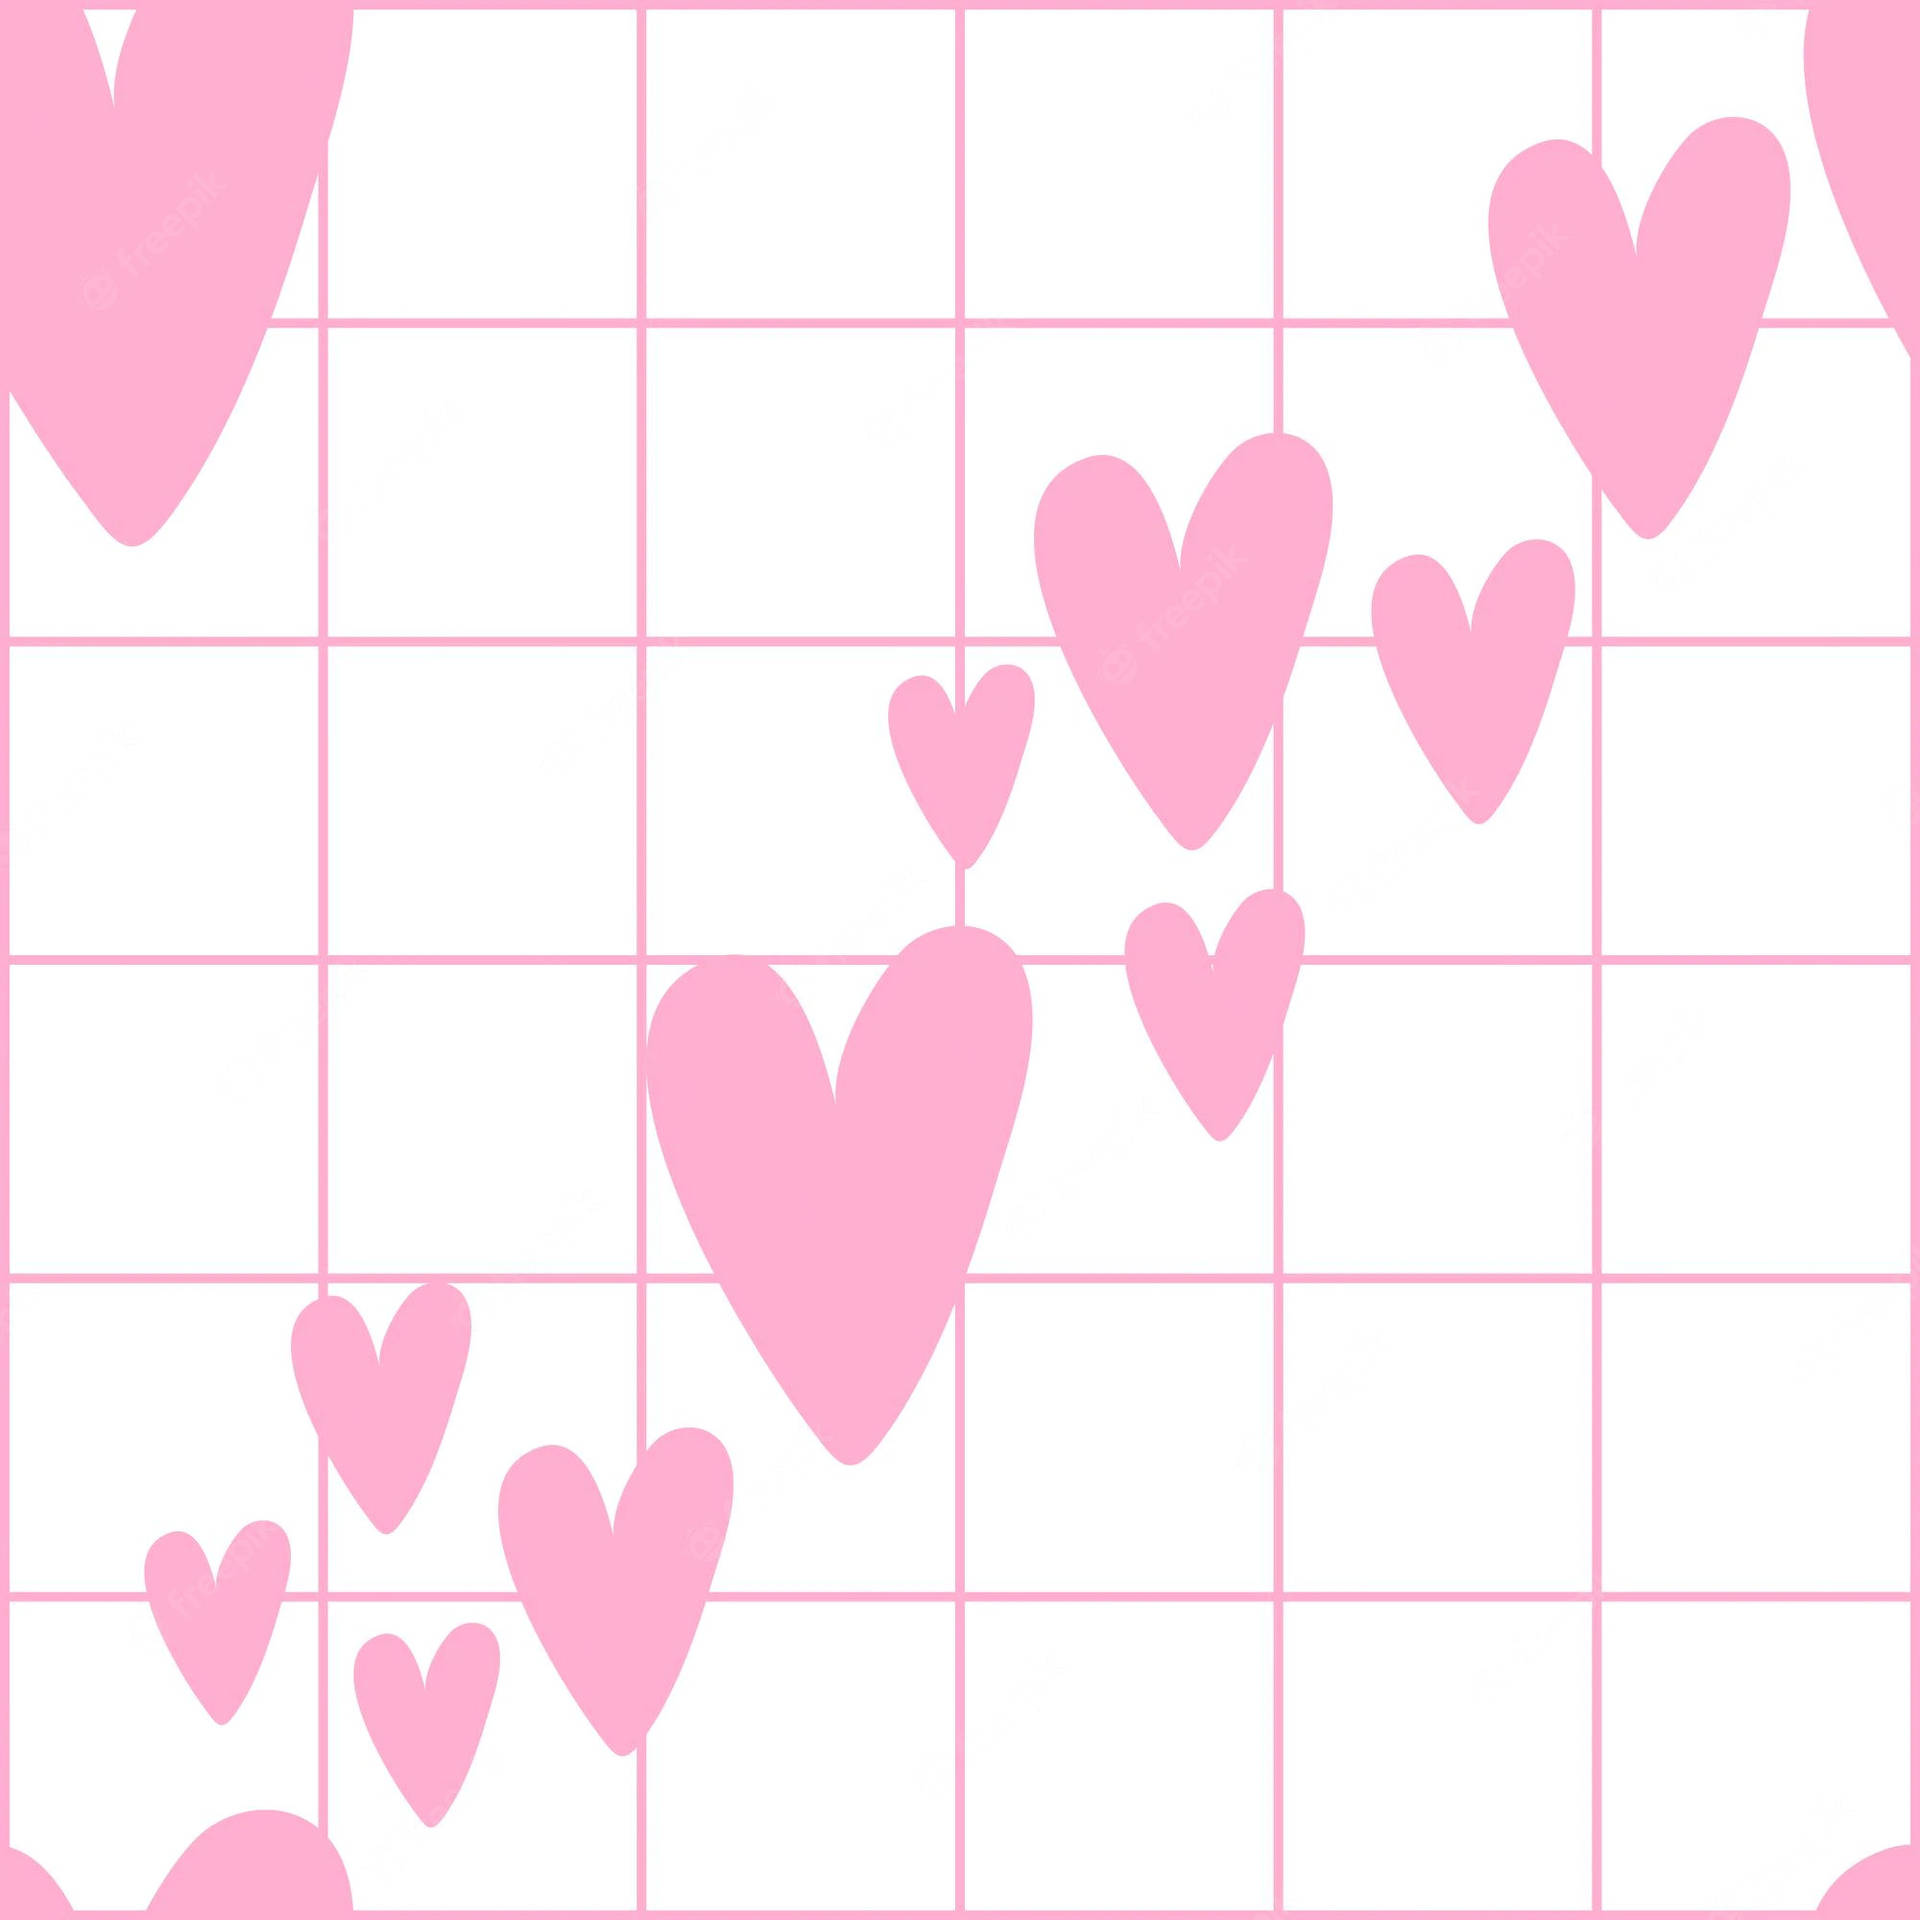 White And Pink With Hearts Grid Aesthetic Wallpaper